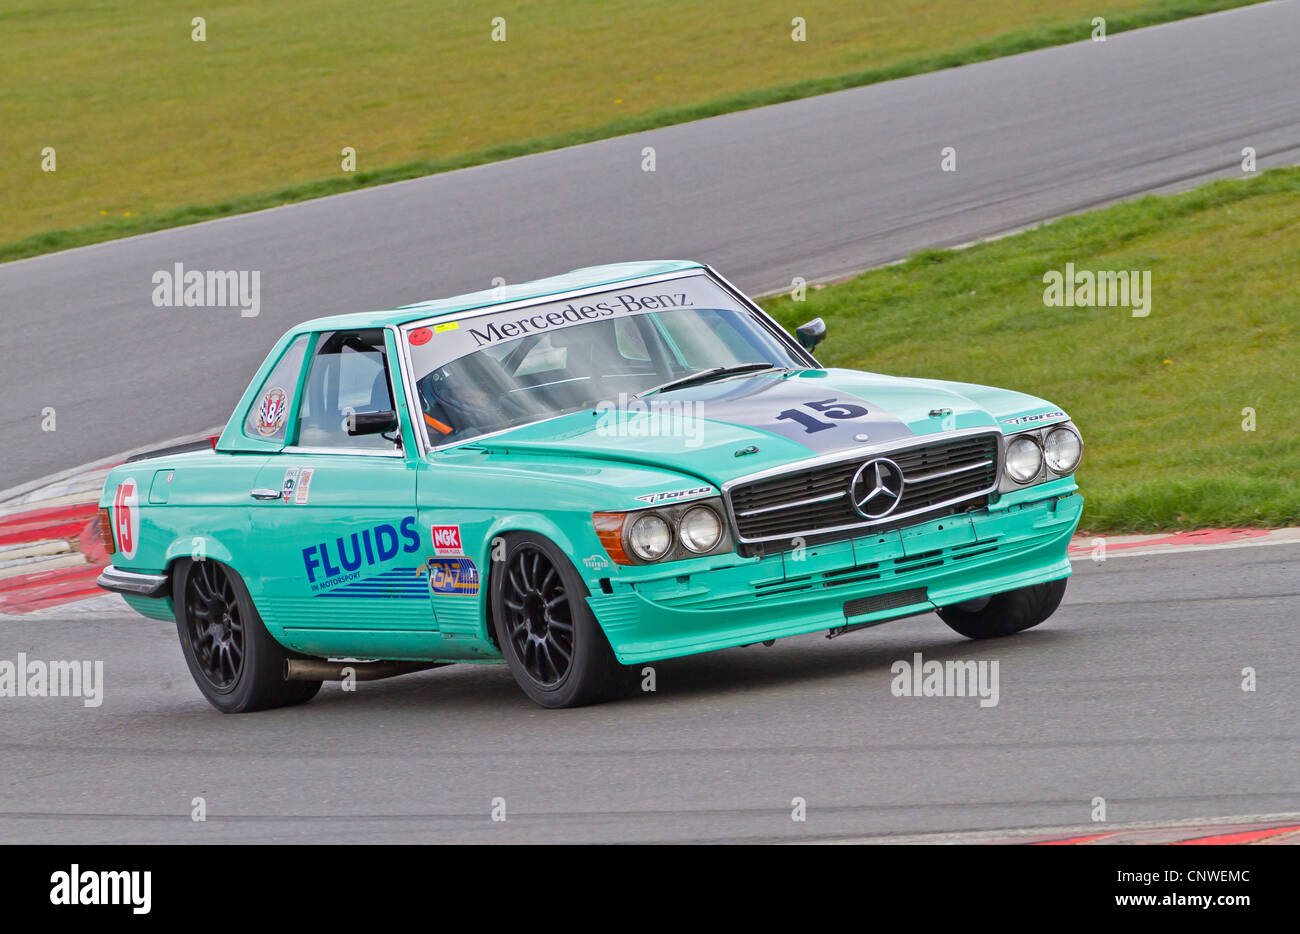 1974 Mercedes 450 Si with driver Ian Jacobs during the CSCC HVRA V8 Challenge race at Snetterton, Norfolk, UK. Stock Photo